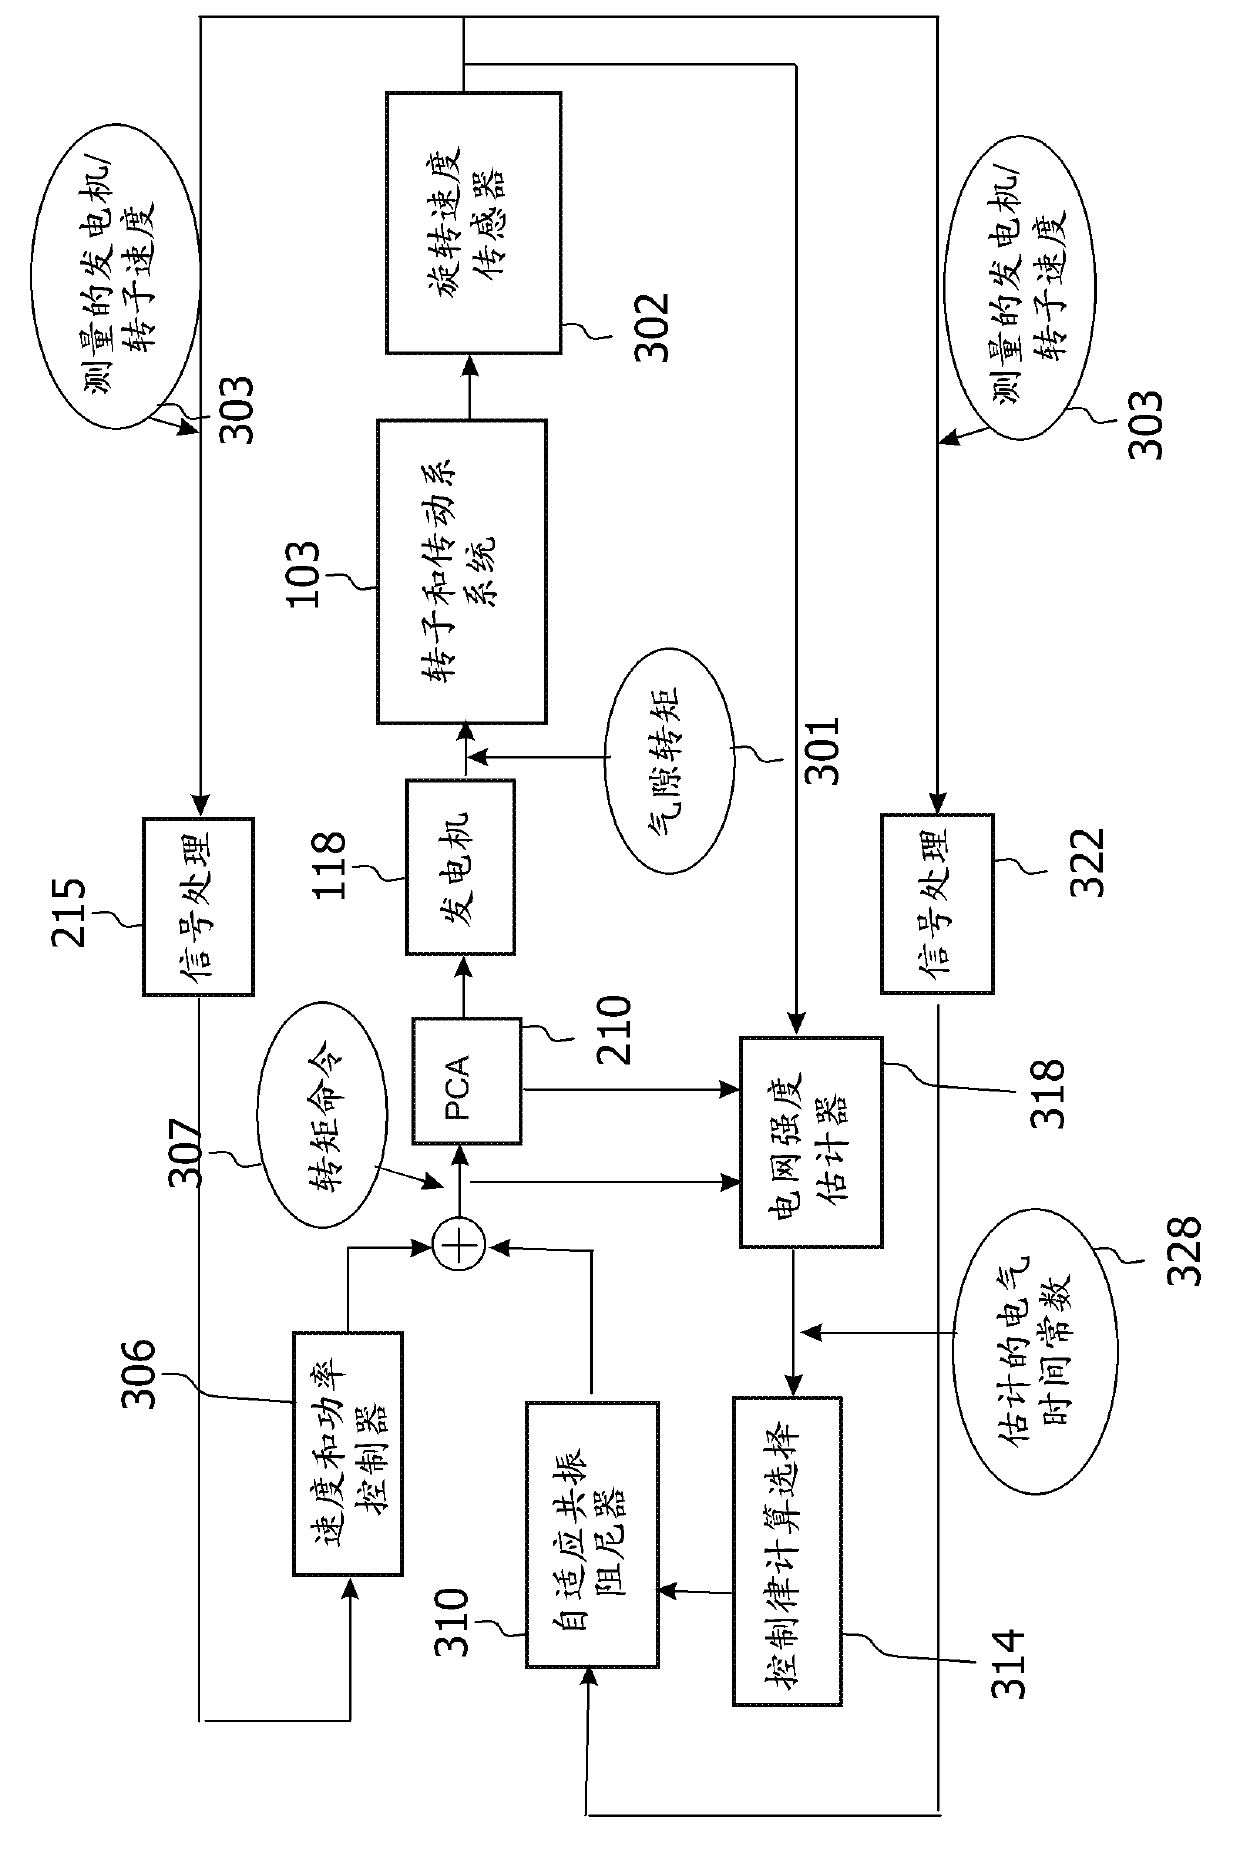 Method and system for resonance dampening in wind turbines